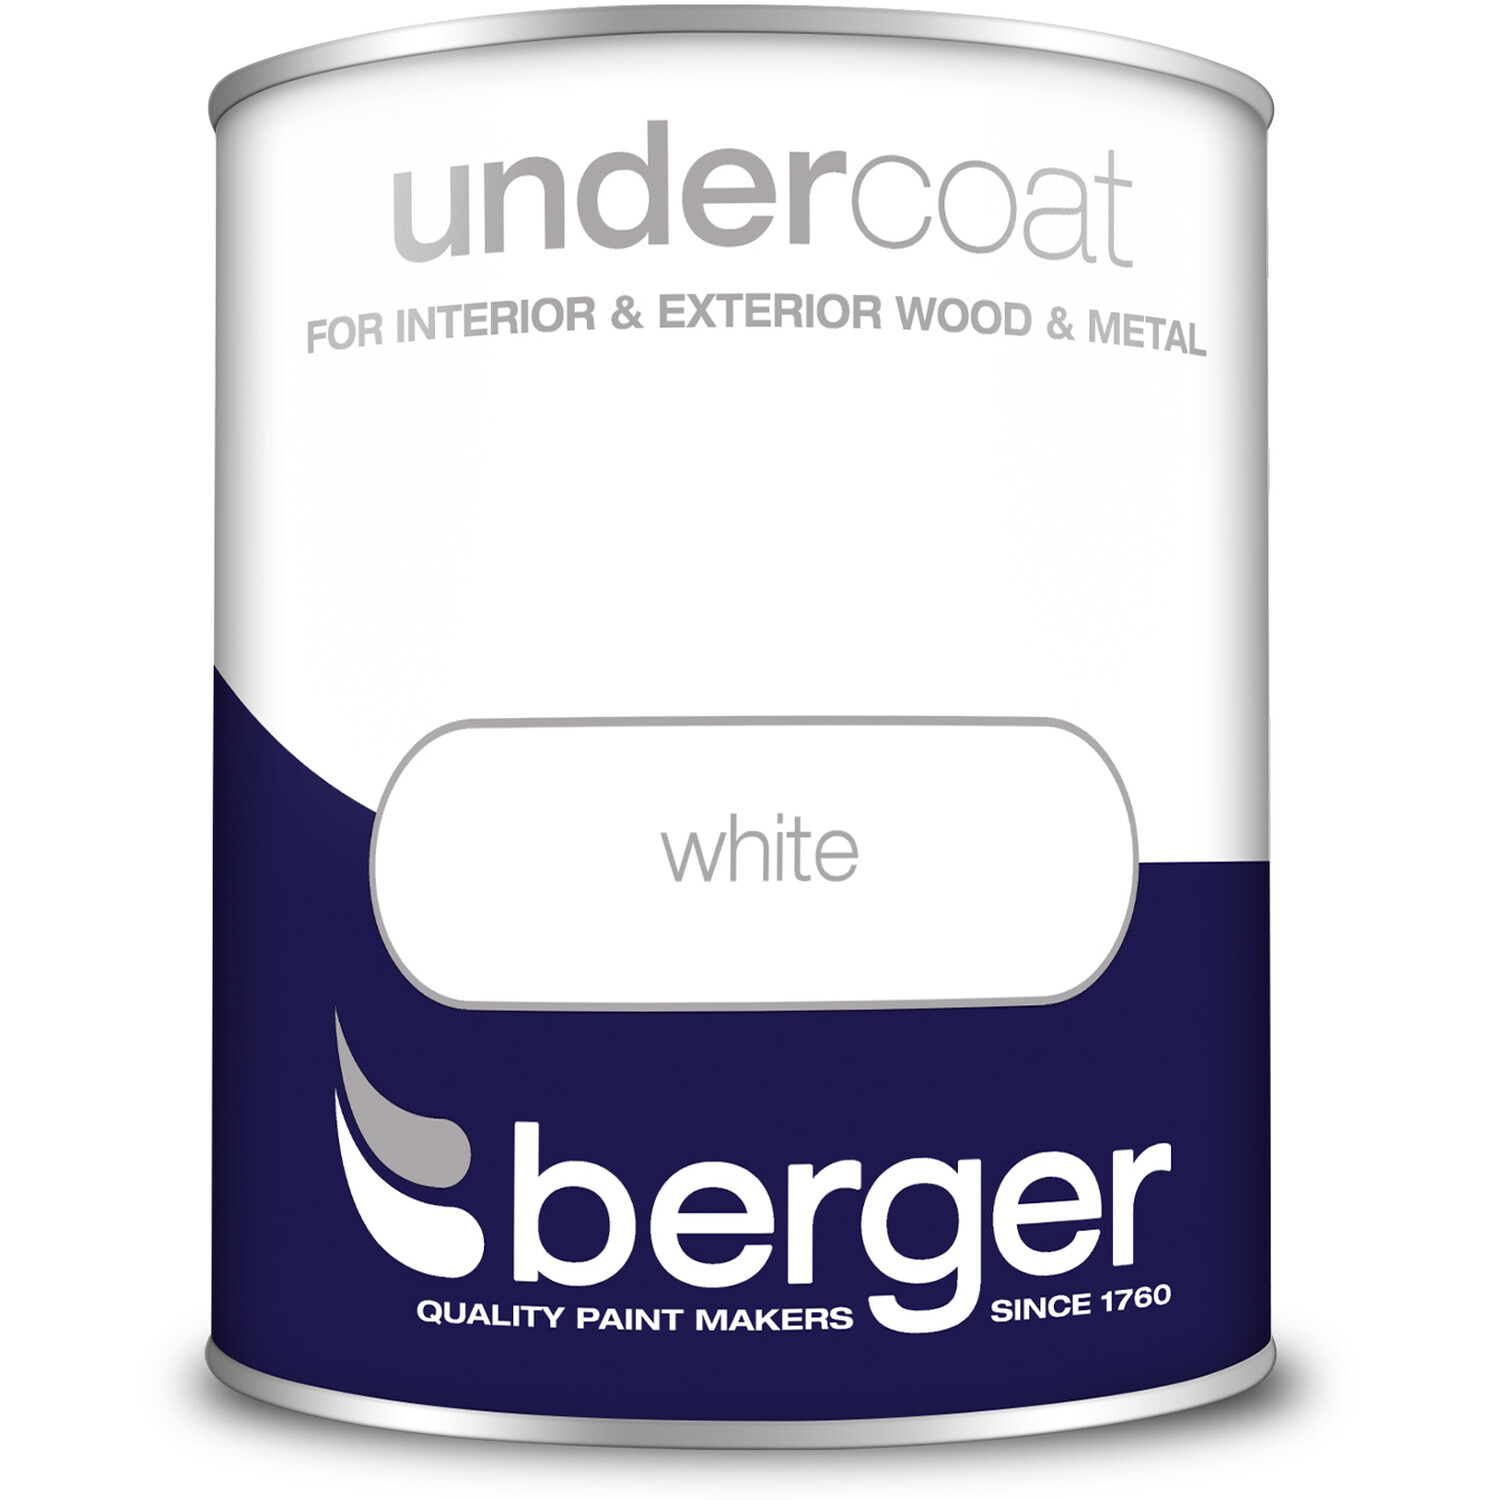 Berger Wood and Metal White Undercoat Paint 750ml Image 2